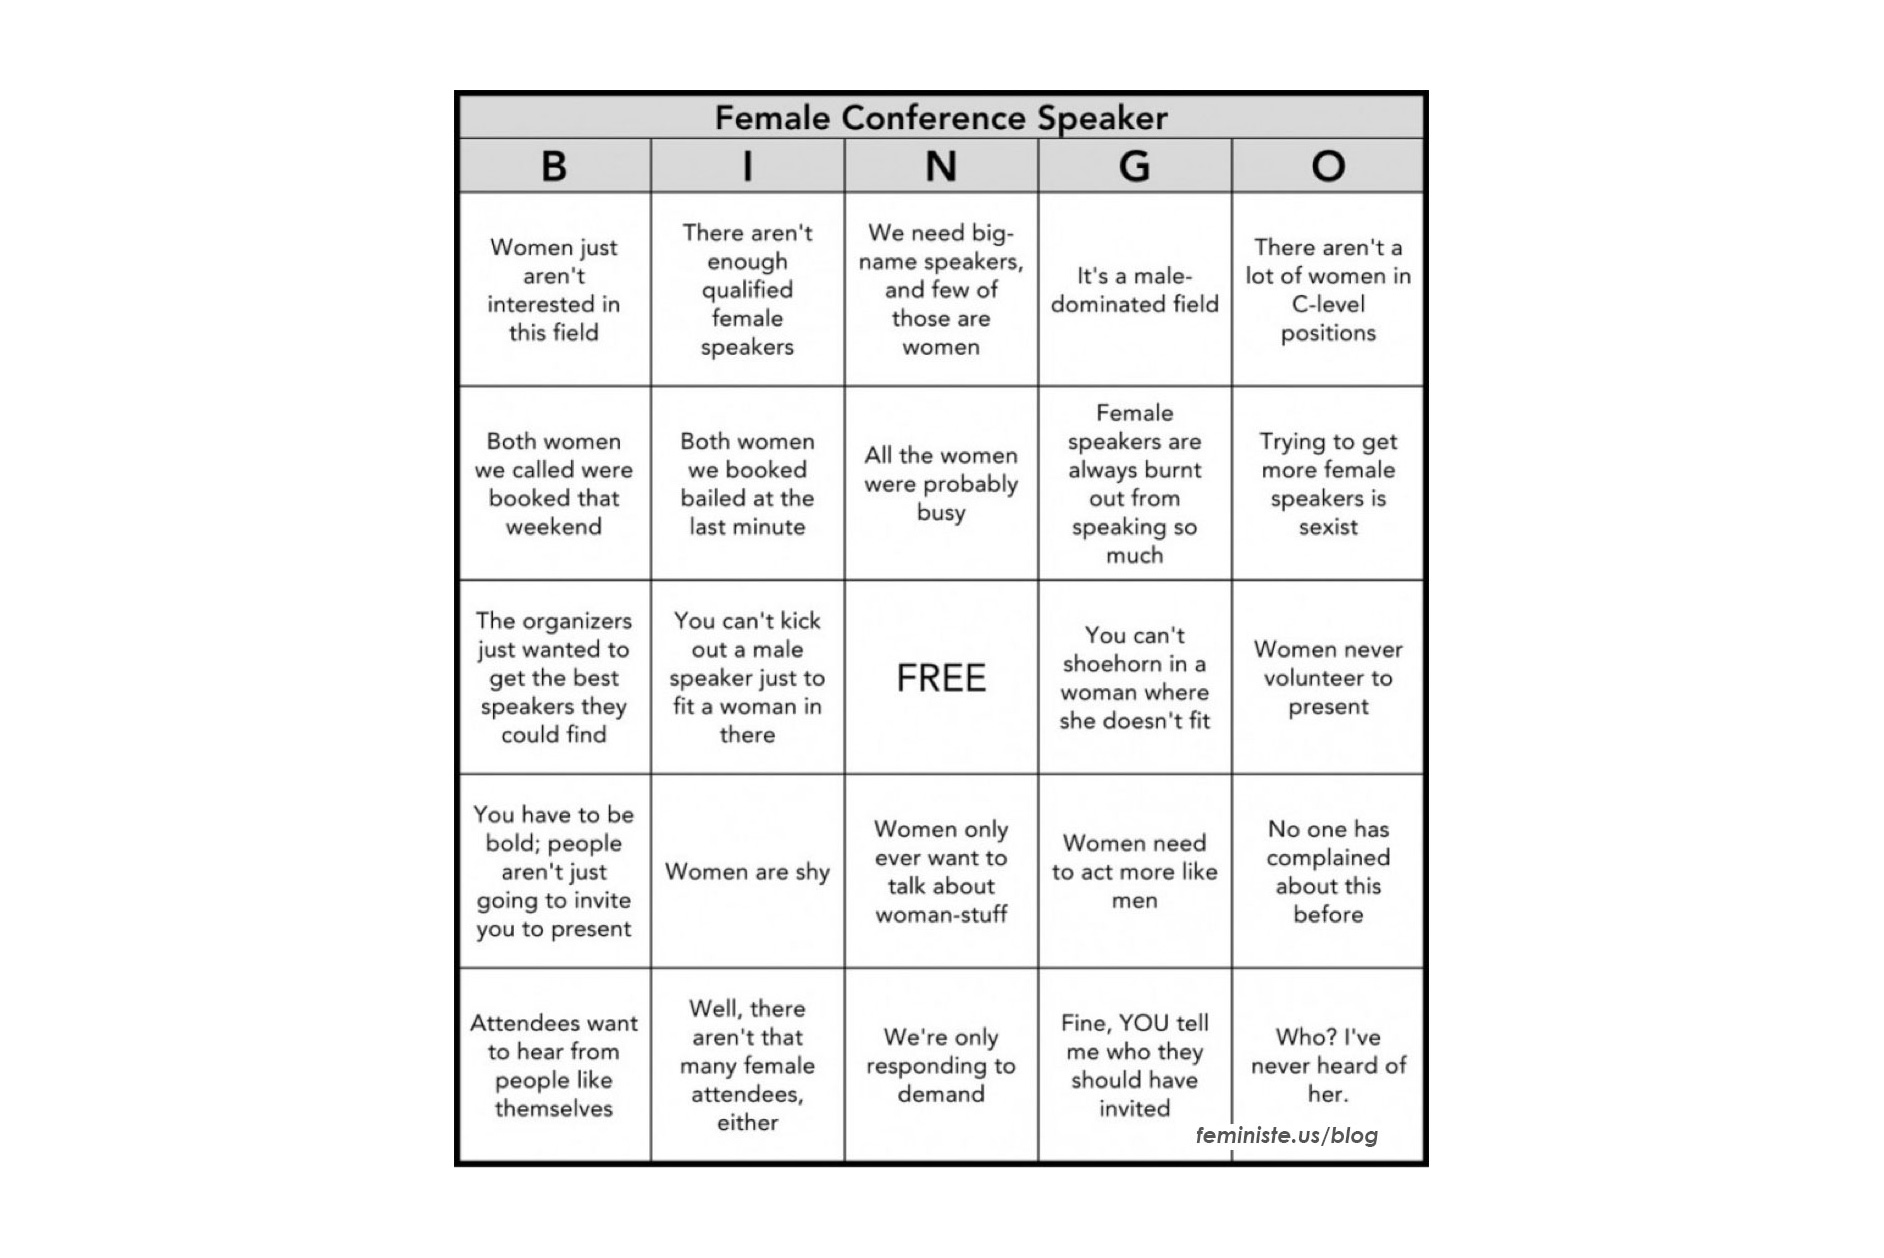 Gender balance bingo card demonstrating popular excuses for precluding women from participating in scientific conferences